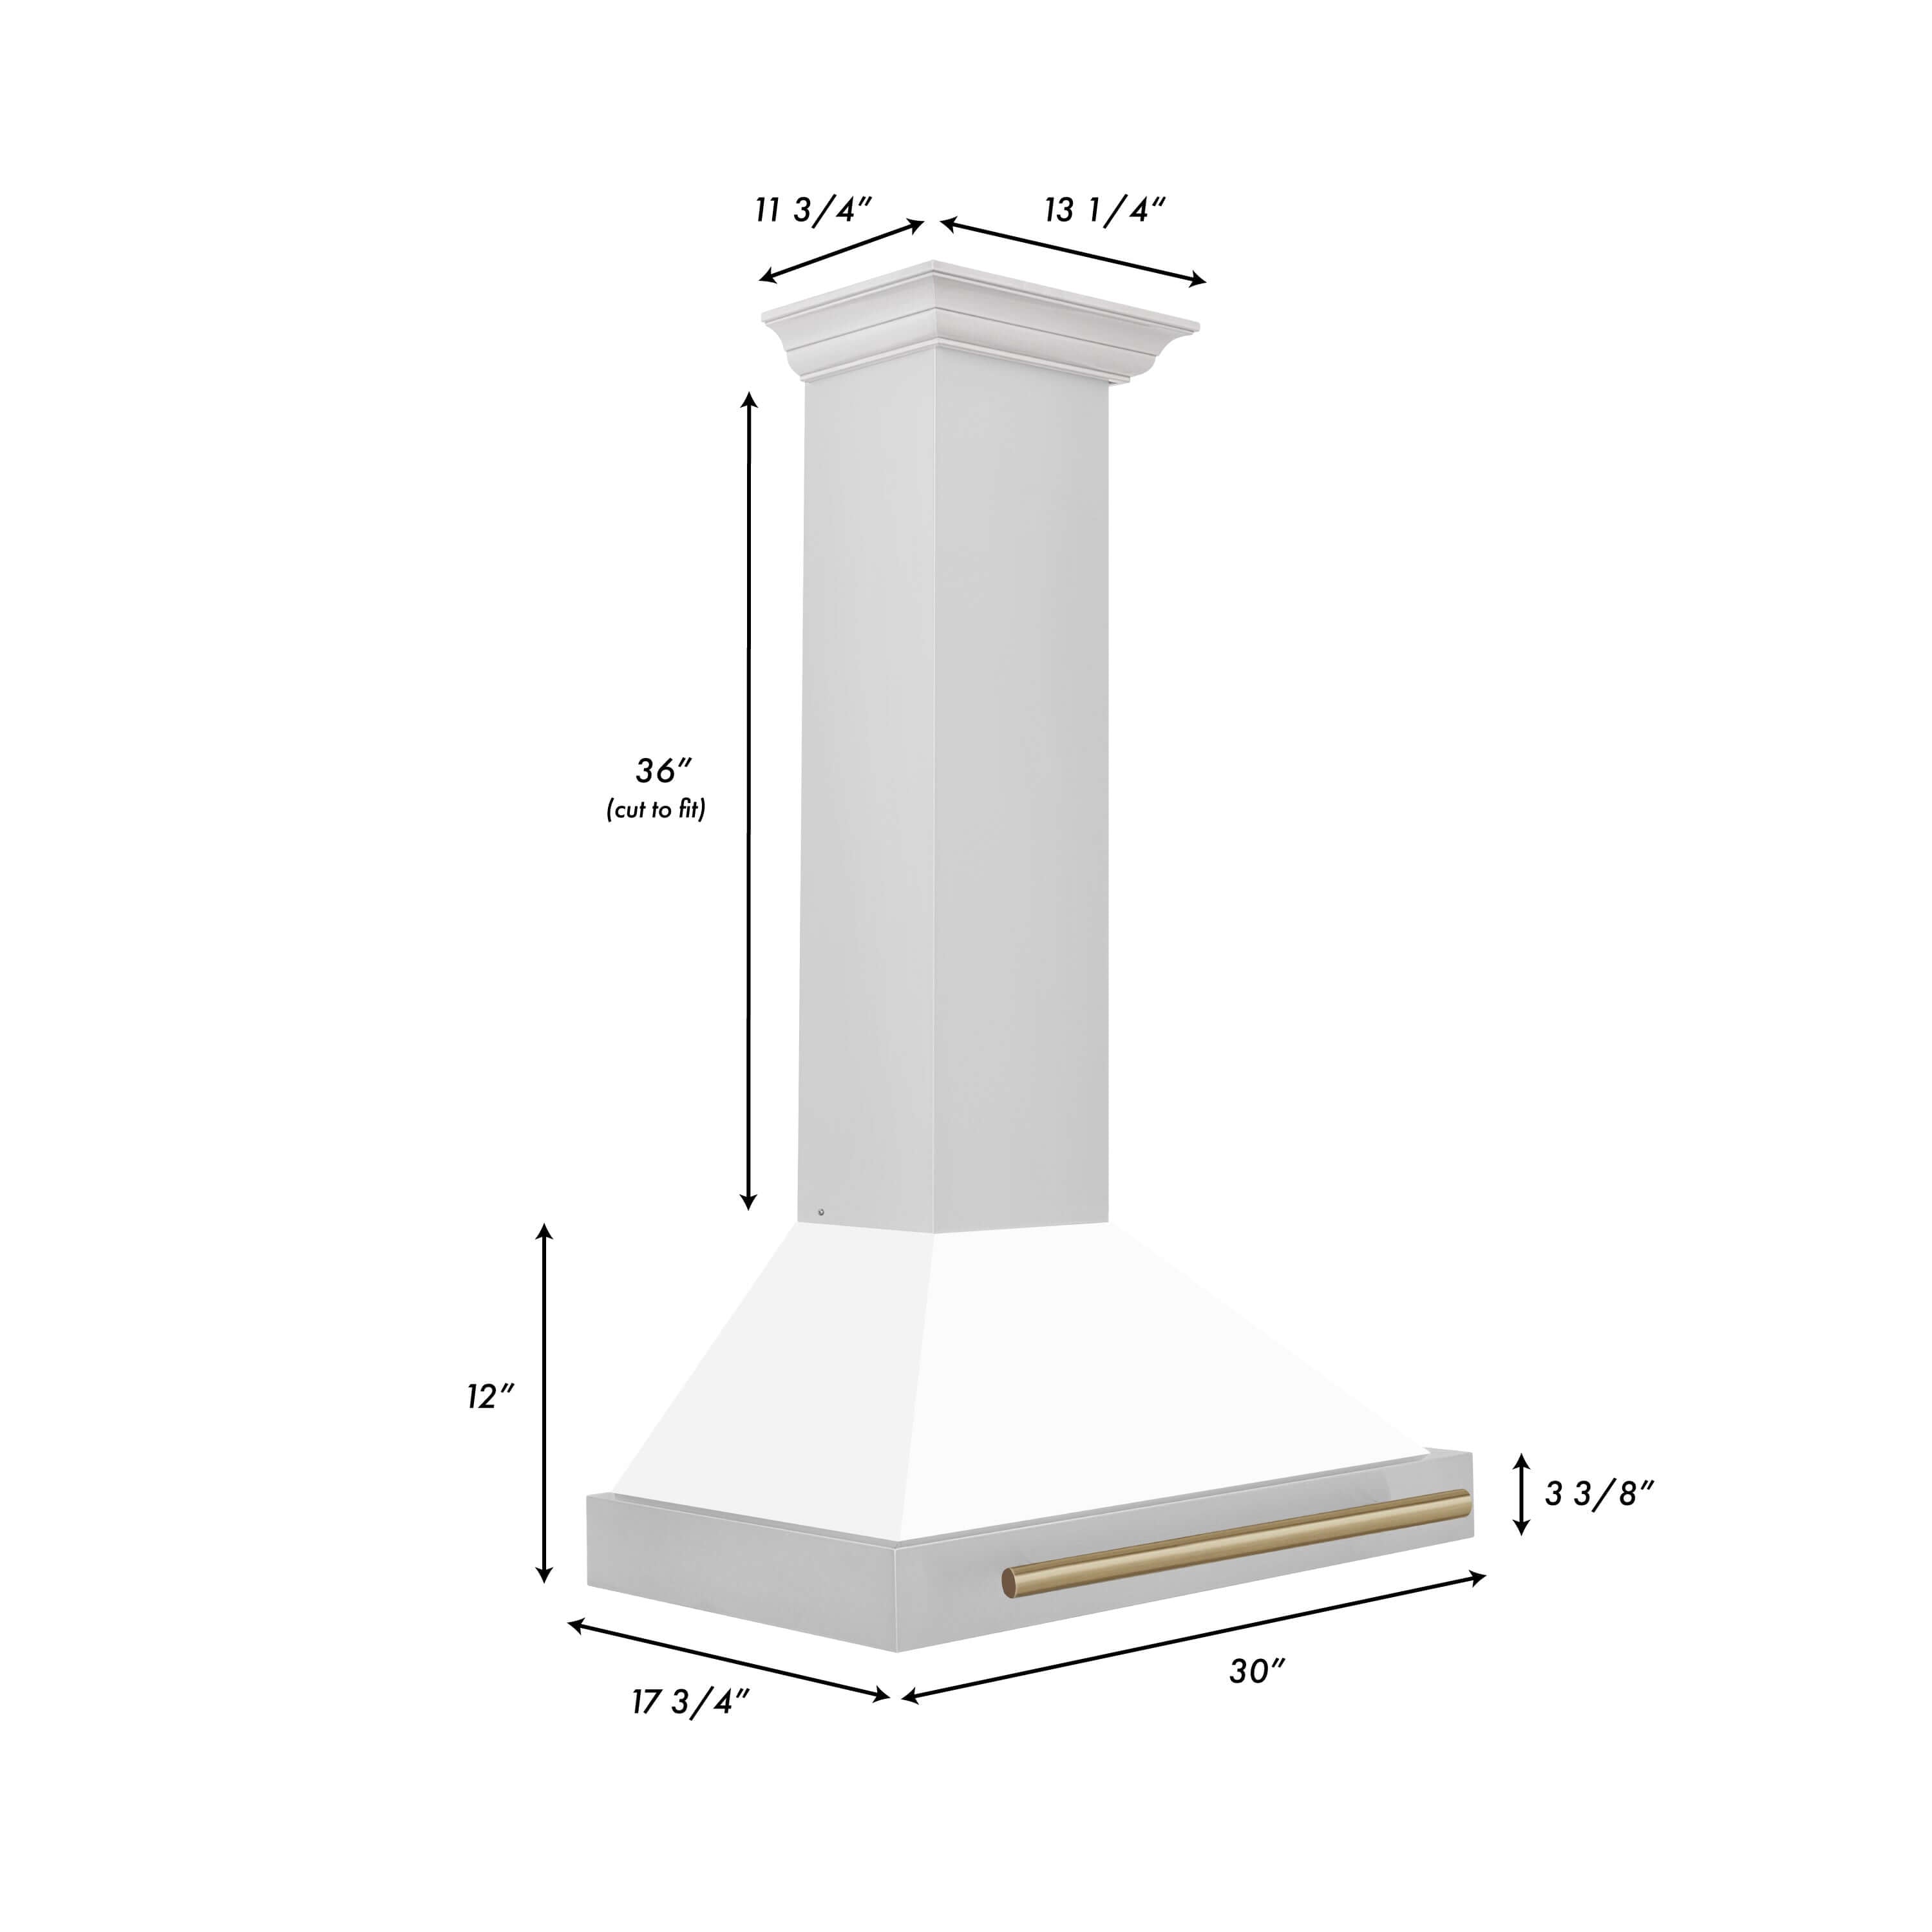 ZLINE Autograph Edition 30 in. Stainless Steel Range Hood with White Matte Shell and Accents (KB4STZ-WM30) dimensional diagram and measurements.